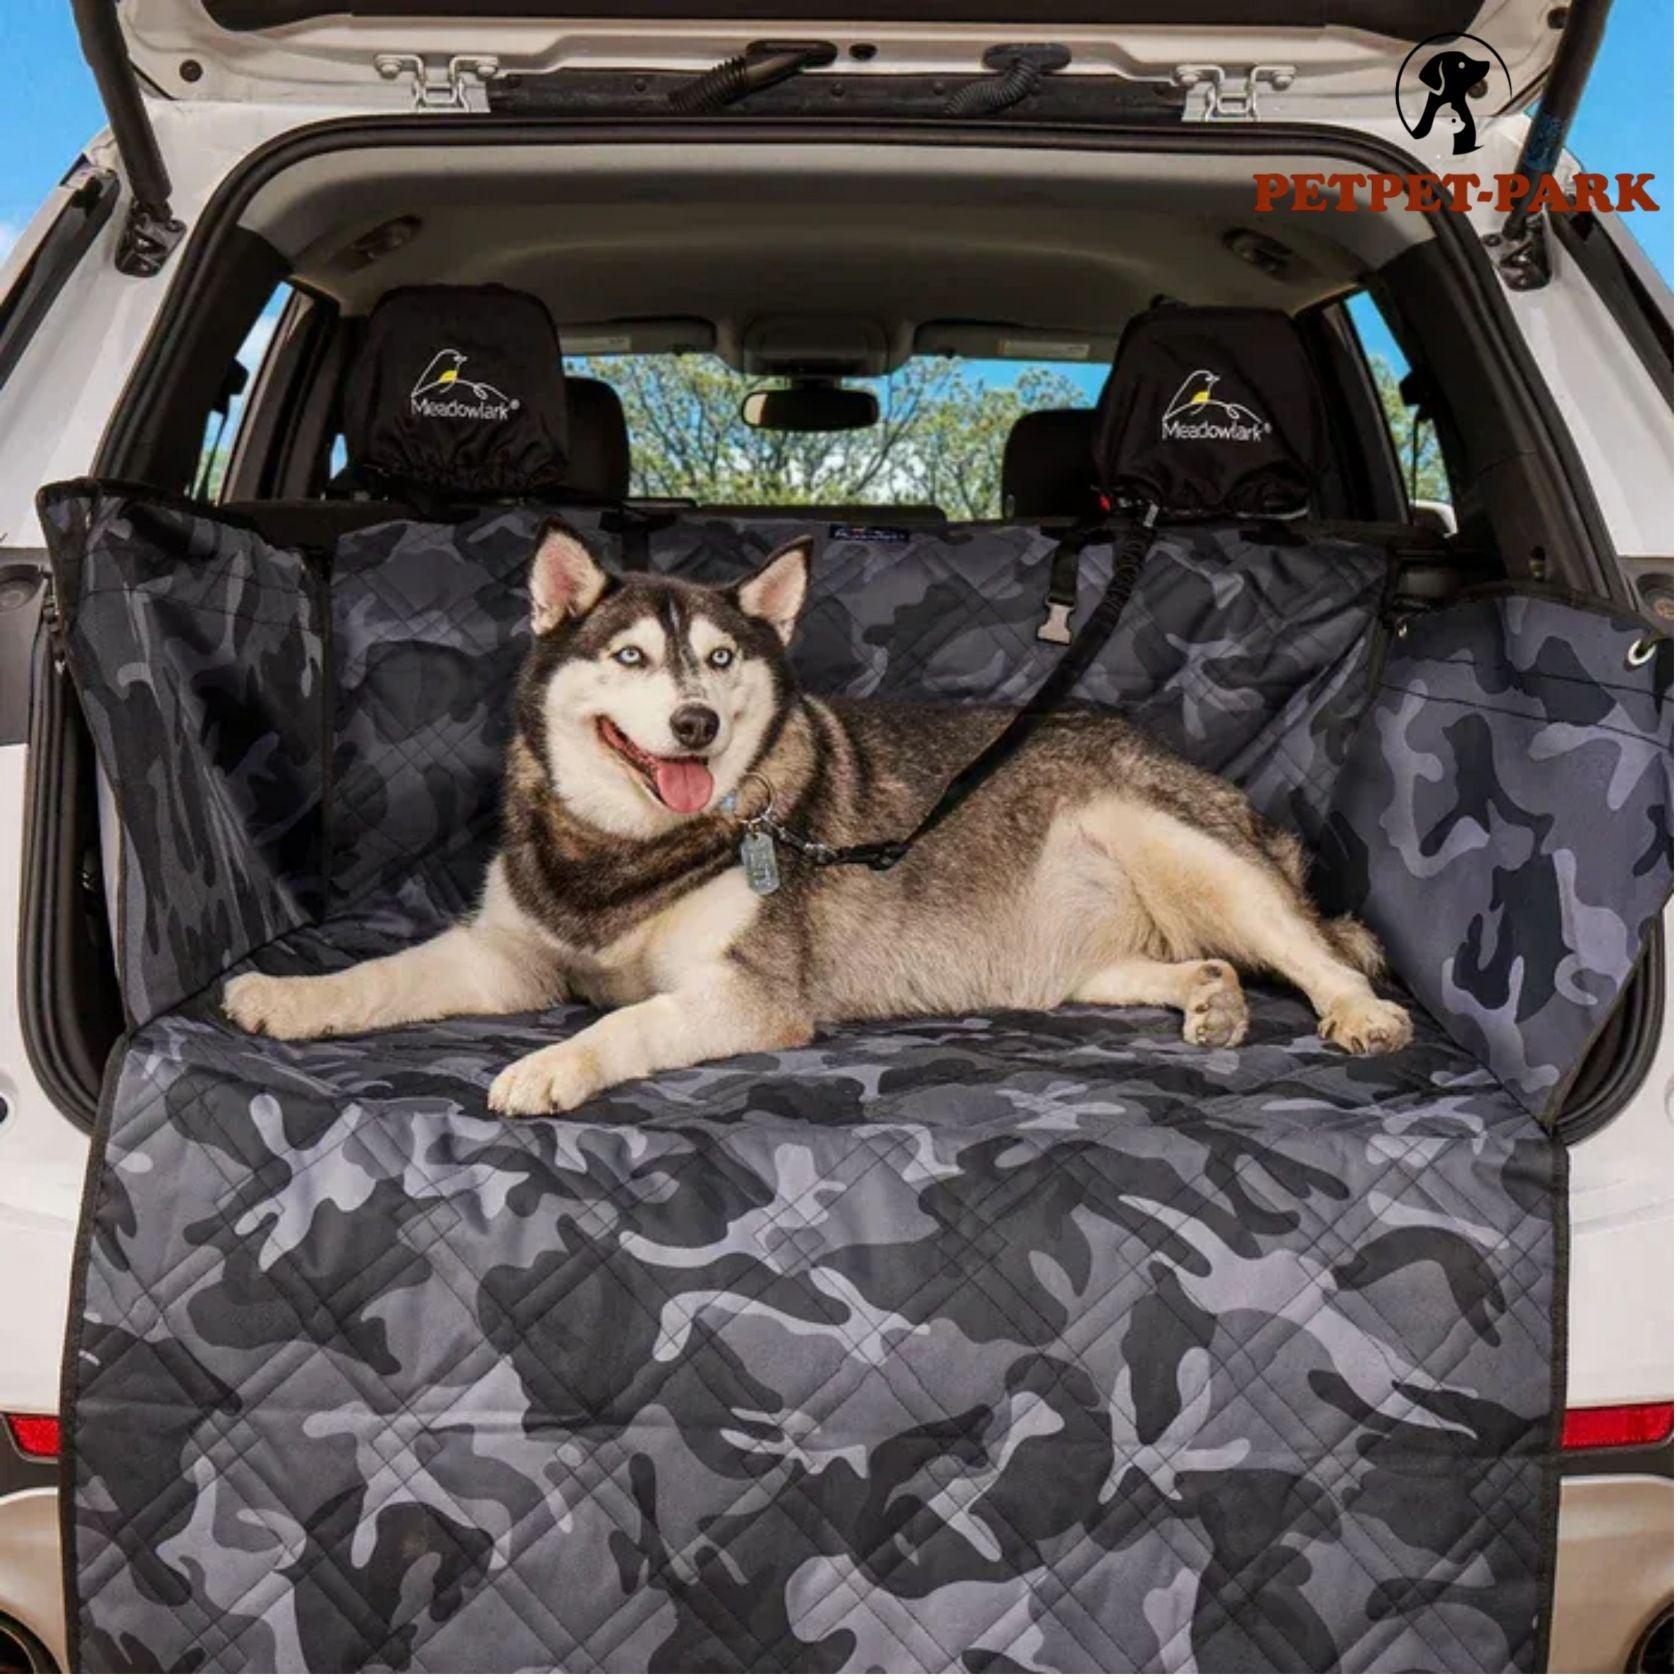 Dog Cargo Cover for SUVs and Cars - Waterproof, Pet-Friendly, Scratch-Resistant, Easy Installation - Petpet-Park